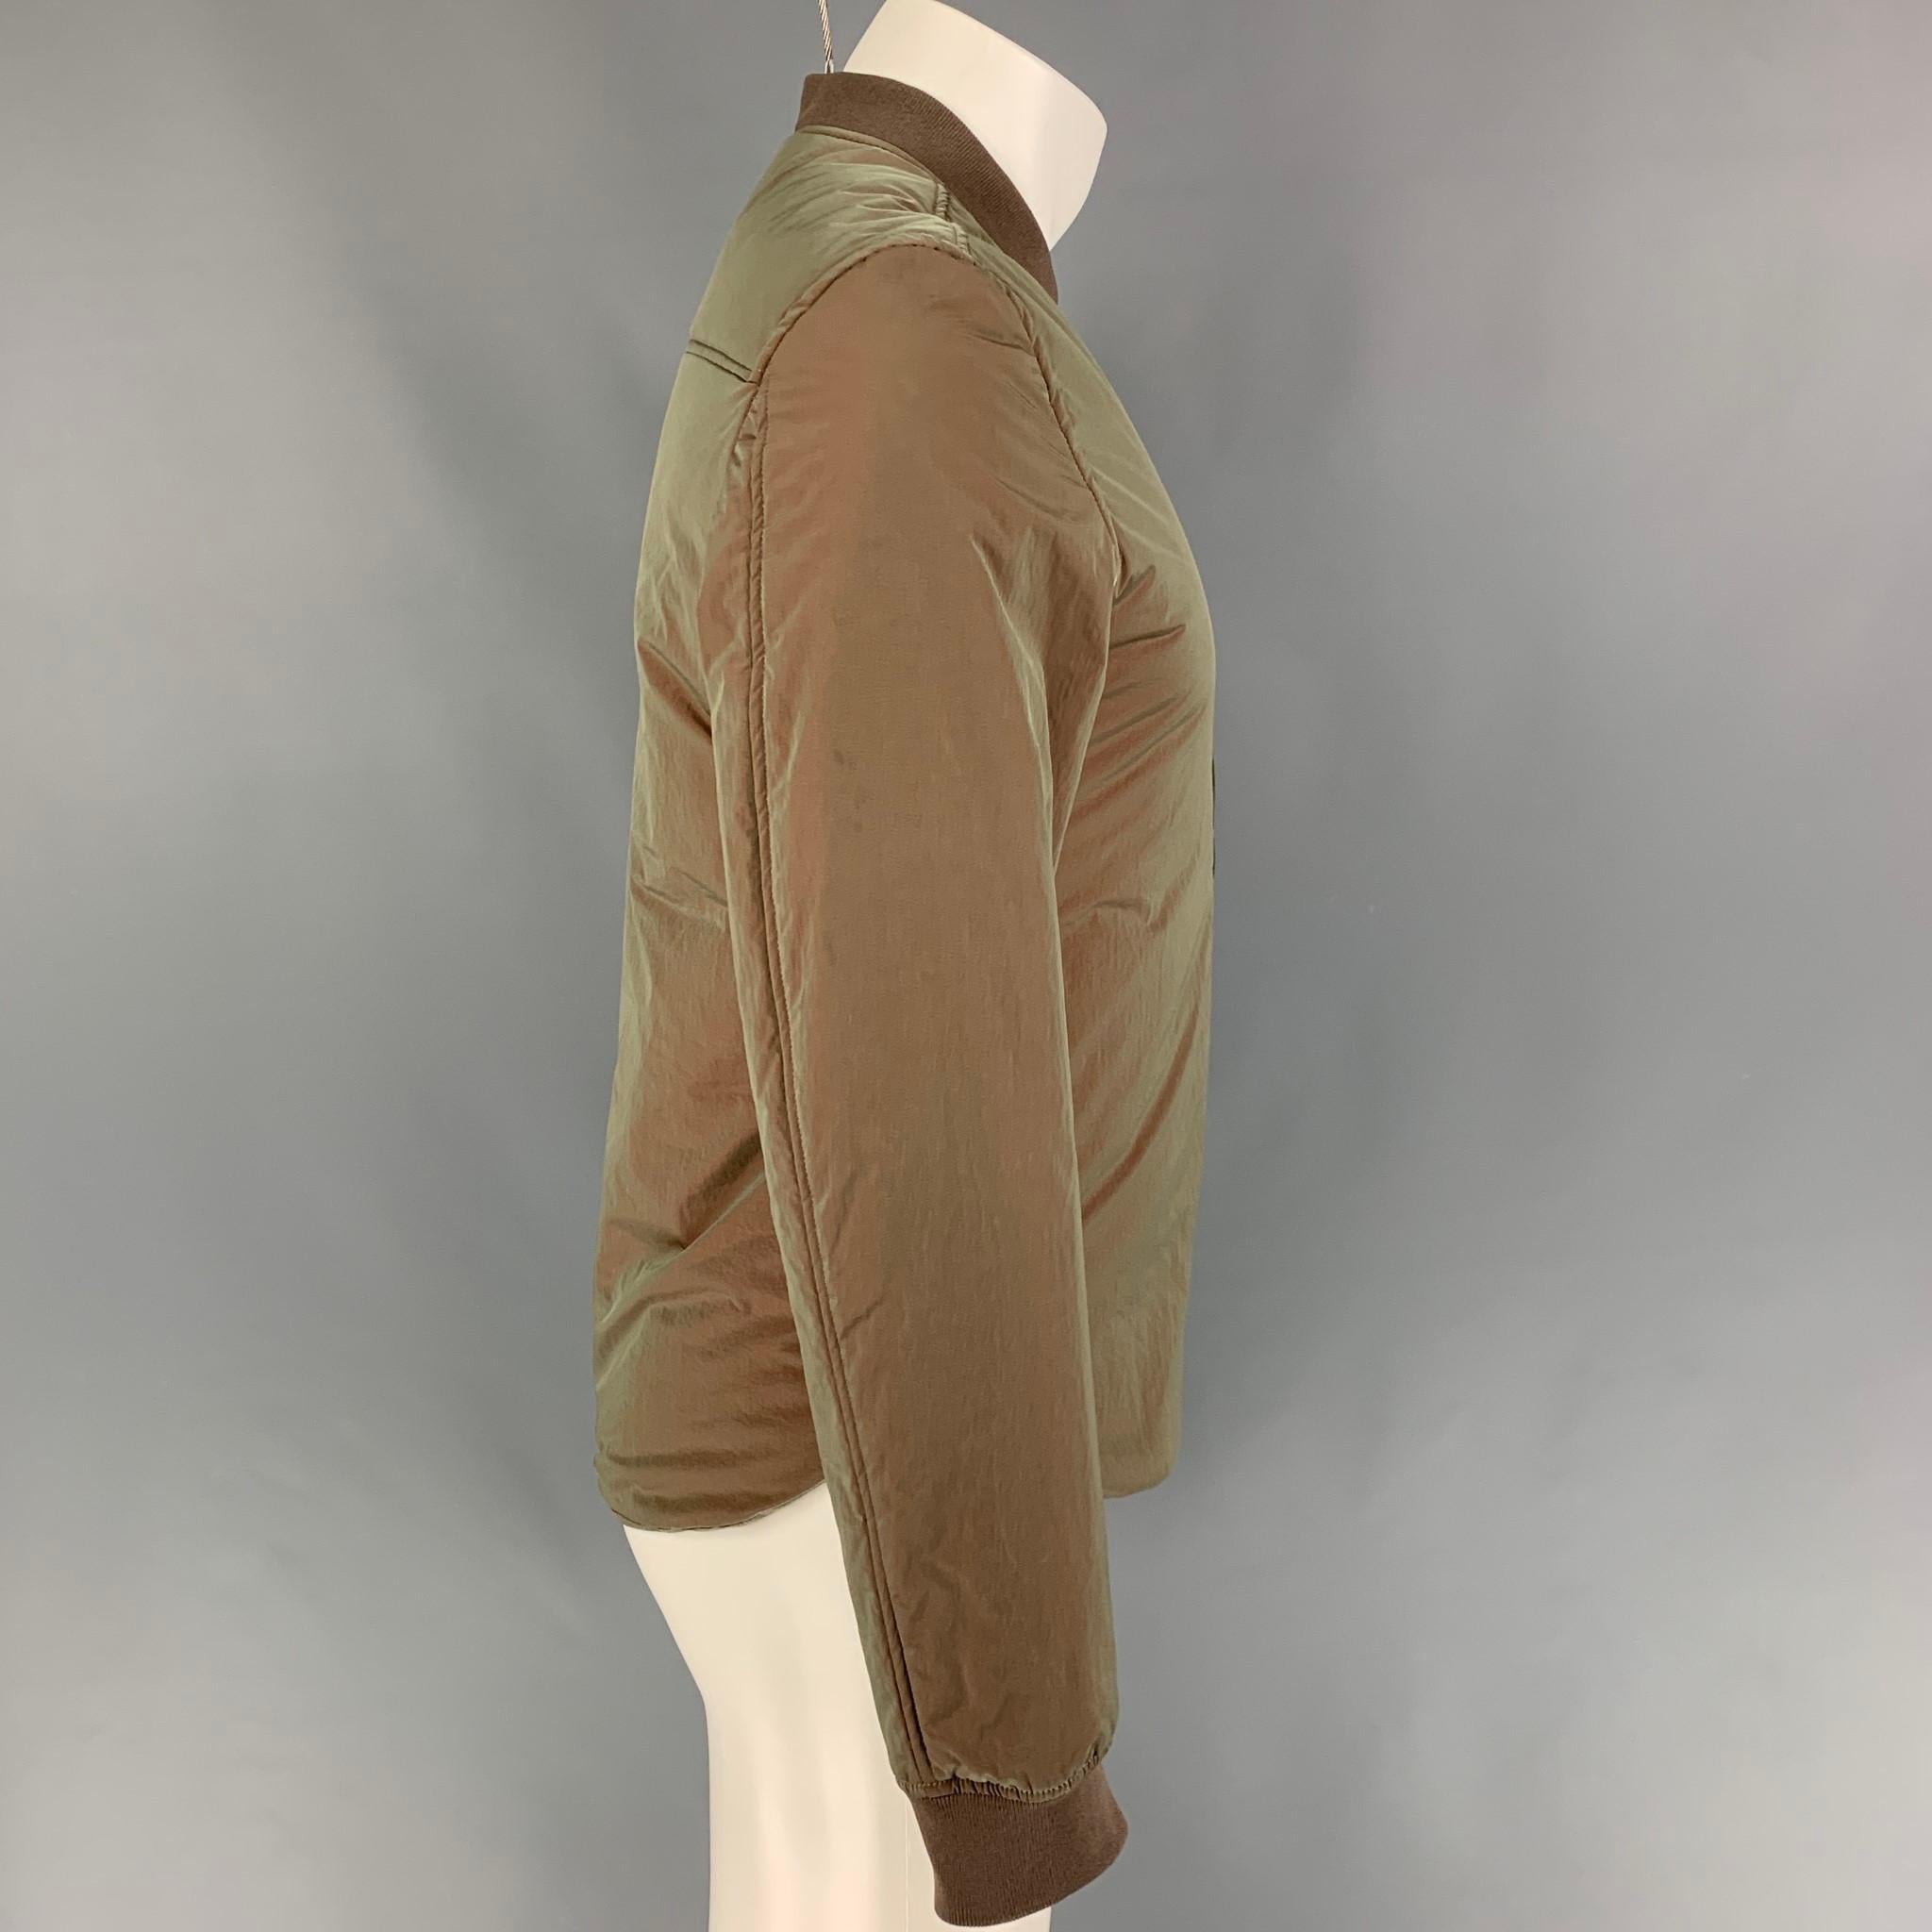 ACNE STUDIOS jacket comes in a olive green iridescent nylon featuring a bomber style, leather patch, ribbed hem, sleeve pocket detail, and a full zip up closure. Made in Romania. 

Very Good Pre-Owned Condition.
Marked: 44

Measurements:

Shoulder: